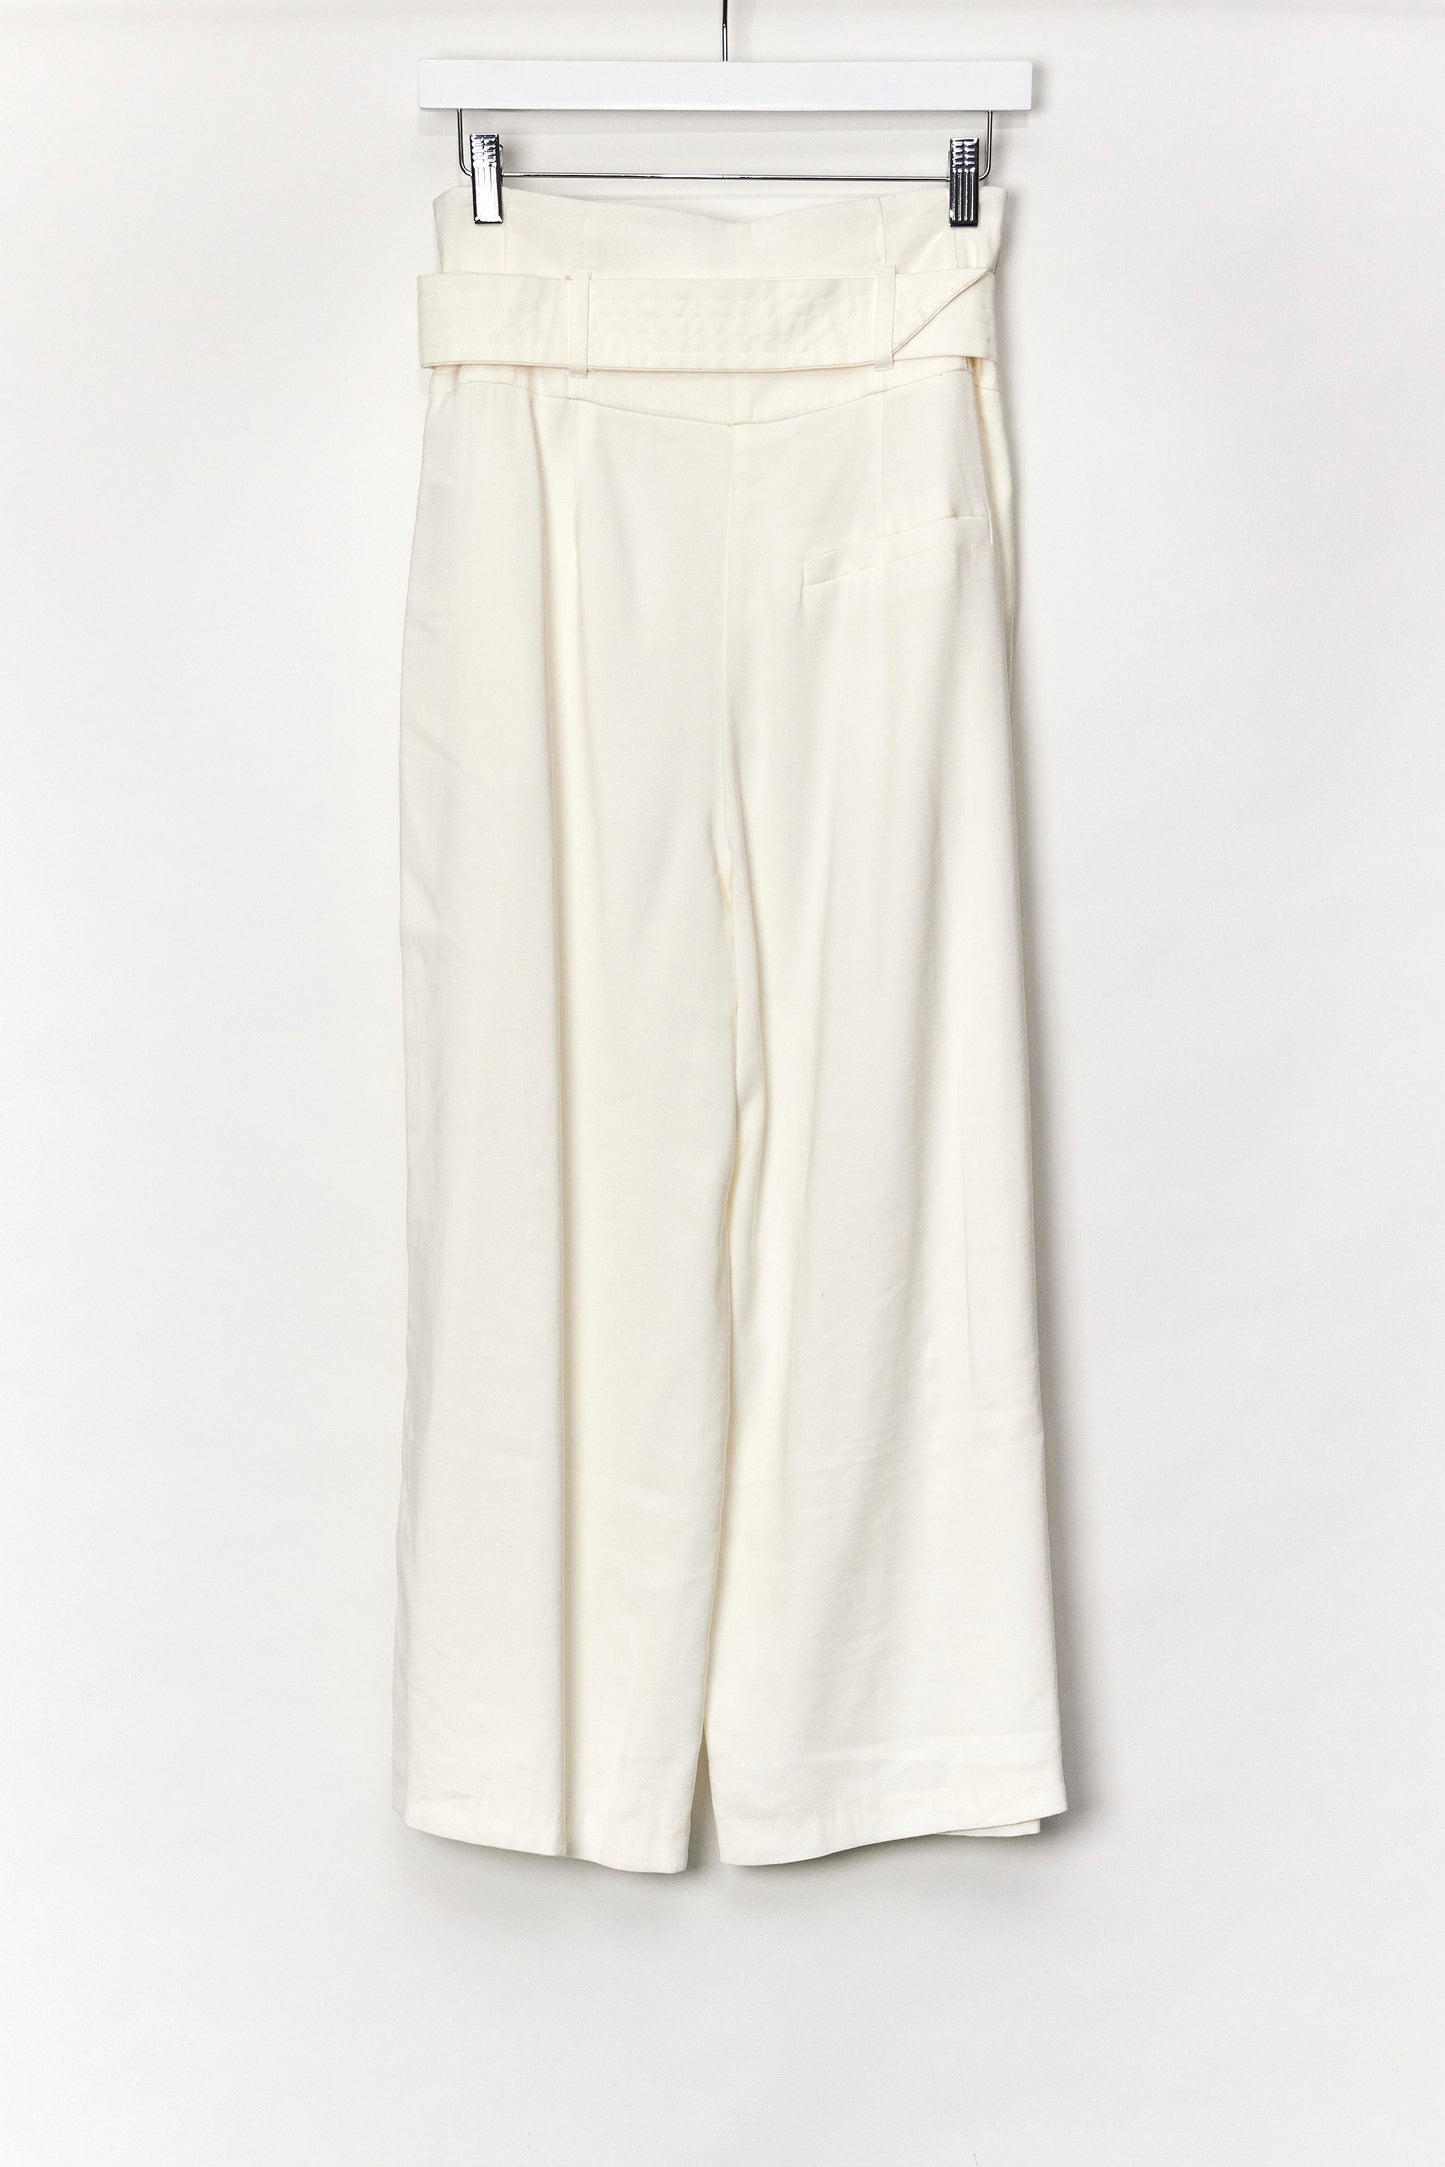 Womens Topshop White Trousers with Belt size Small